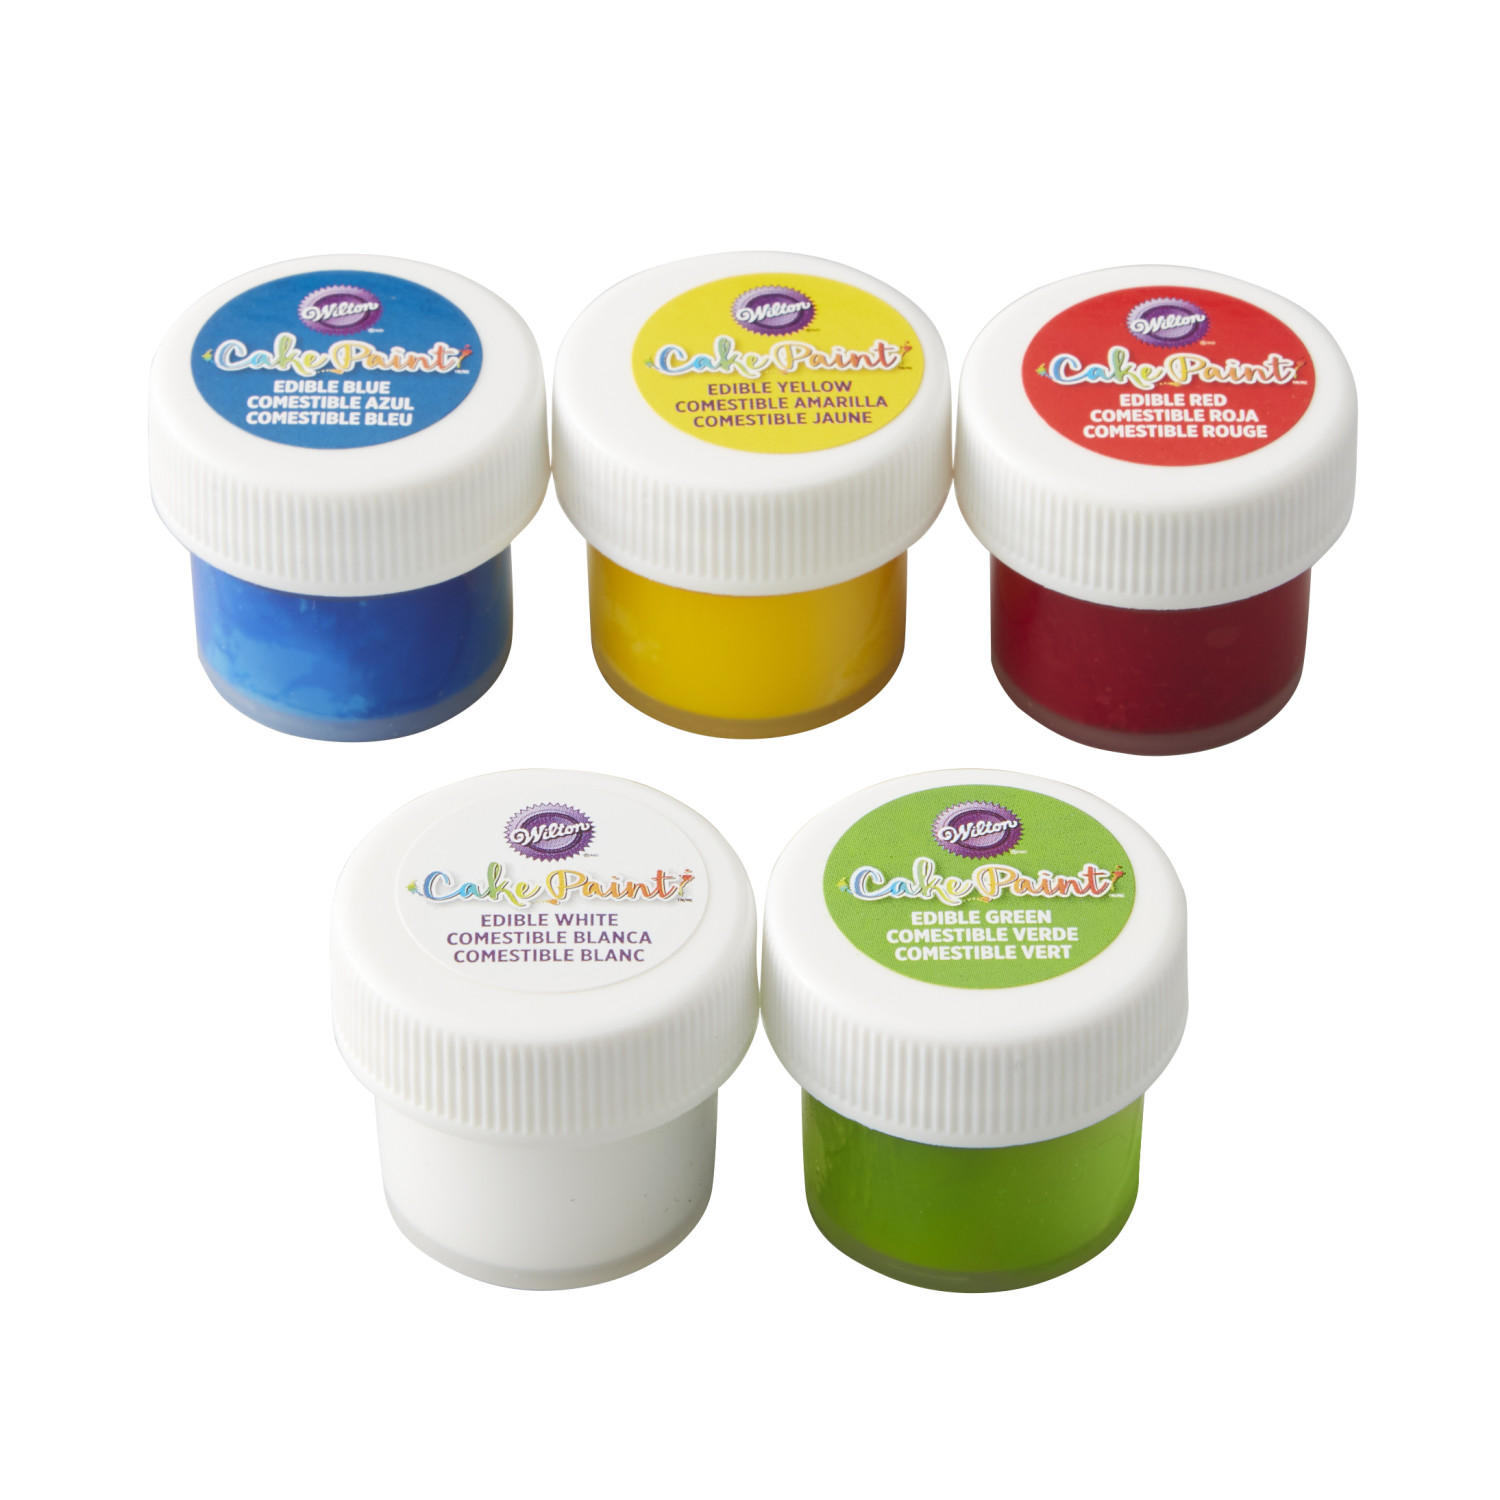 Wilton Assorted Icing Colors - 12 count, 0.5 oz jars